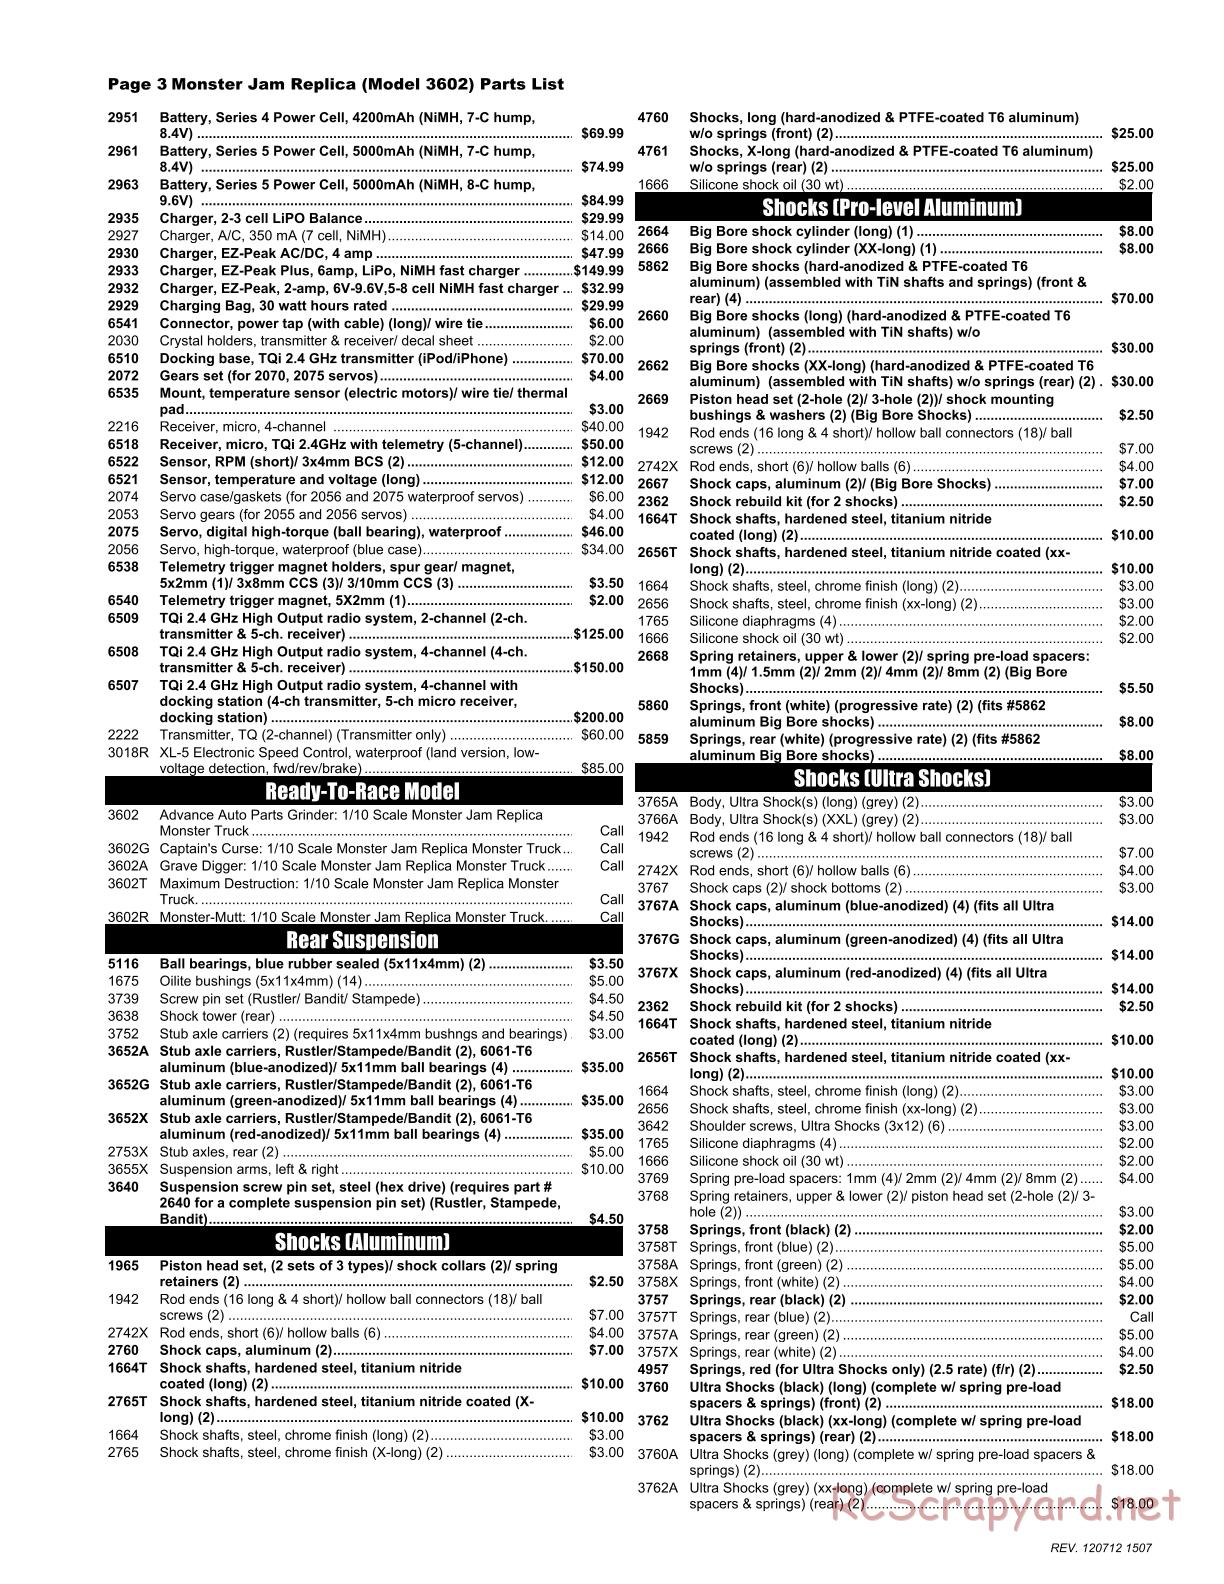 Traxxas - Monster Jam - Parts List - Page 3